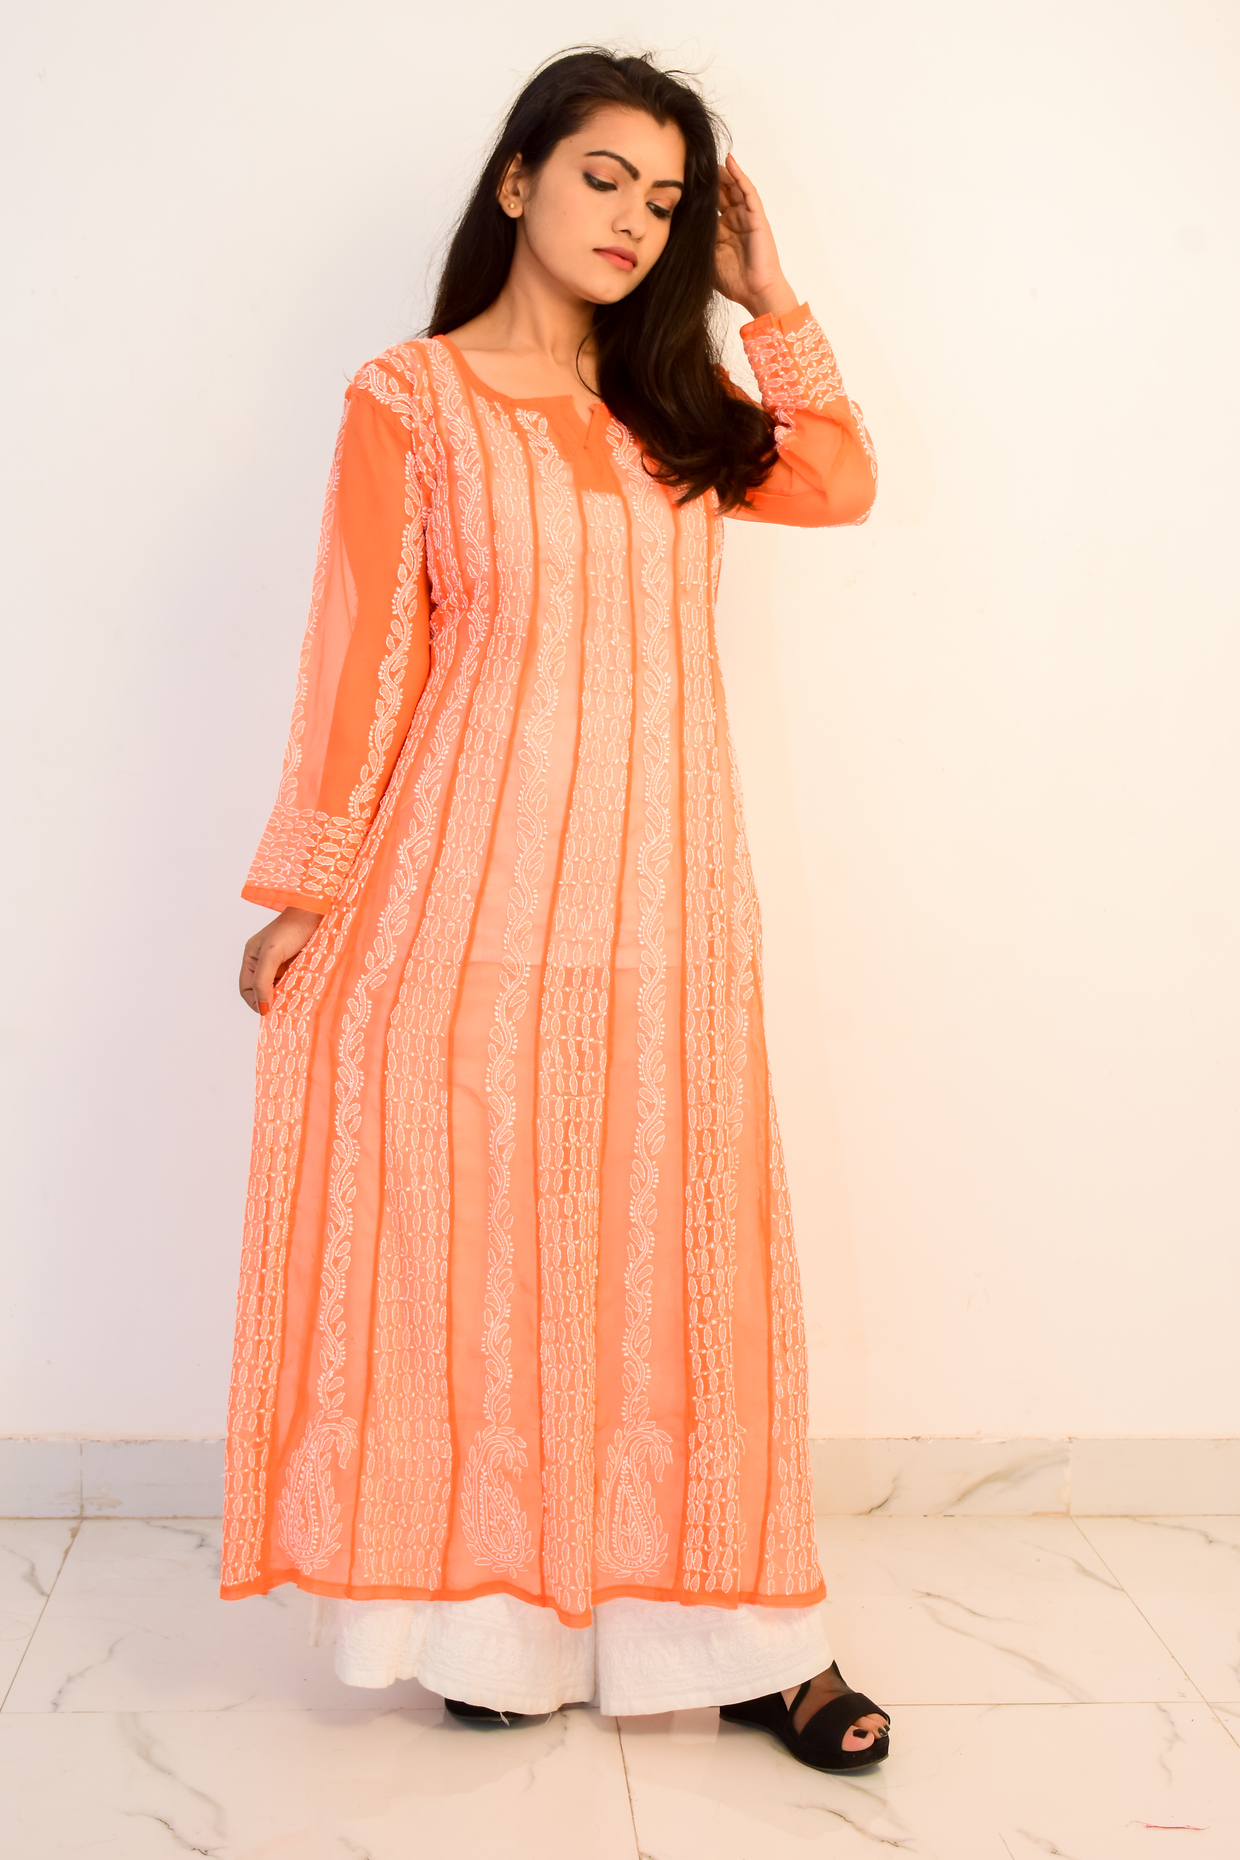 Buy Hand Embroidered Lucknowi Chikan Orange and White Georgette Kurti